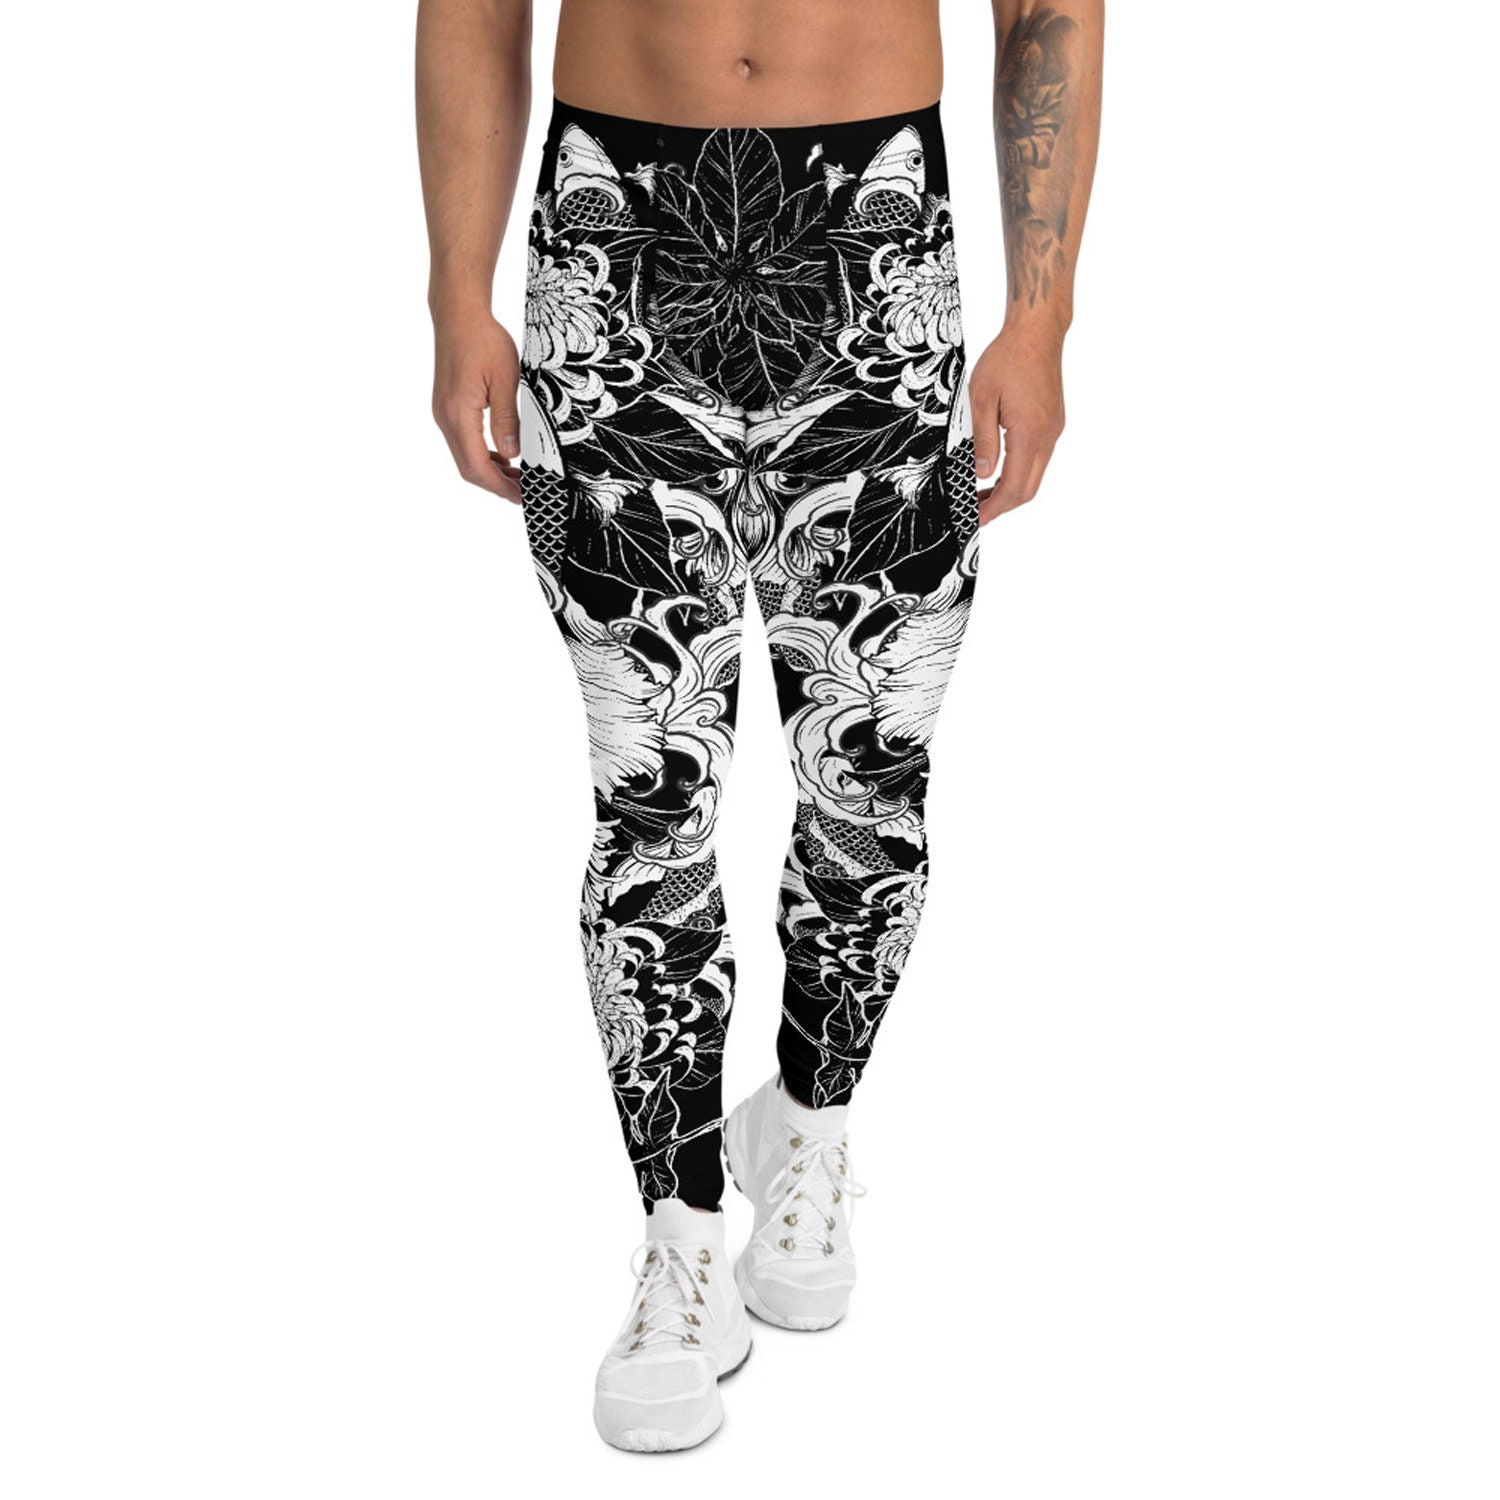 Mens Leggings Meggings All Over Print Yellow and Gray Camouflage Printed  Leggings, Perfect Workout Leggings for Running, MMA, Judo, Yoga 